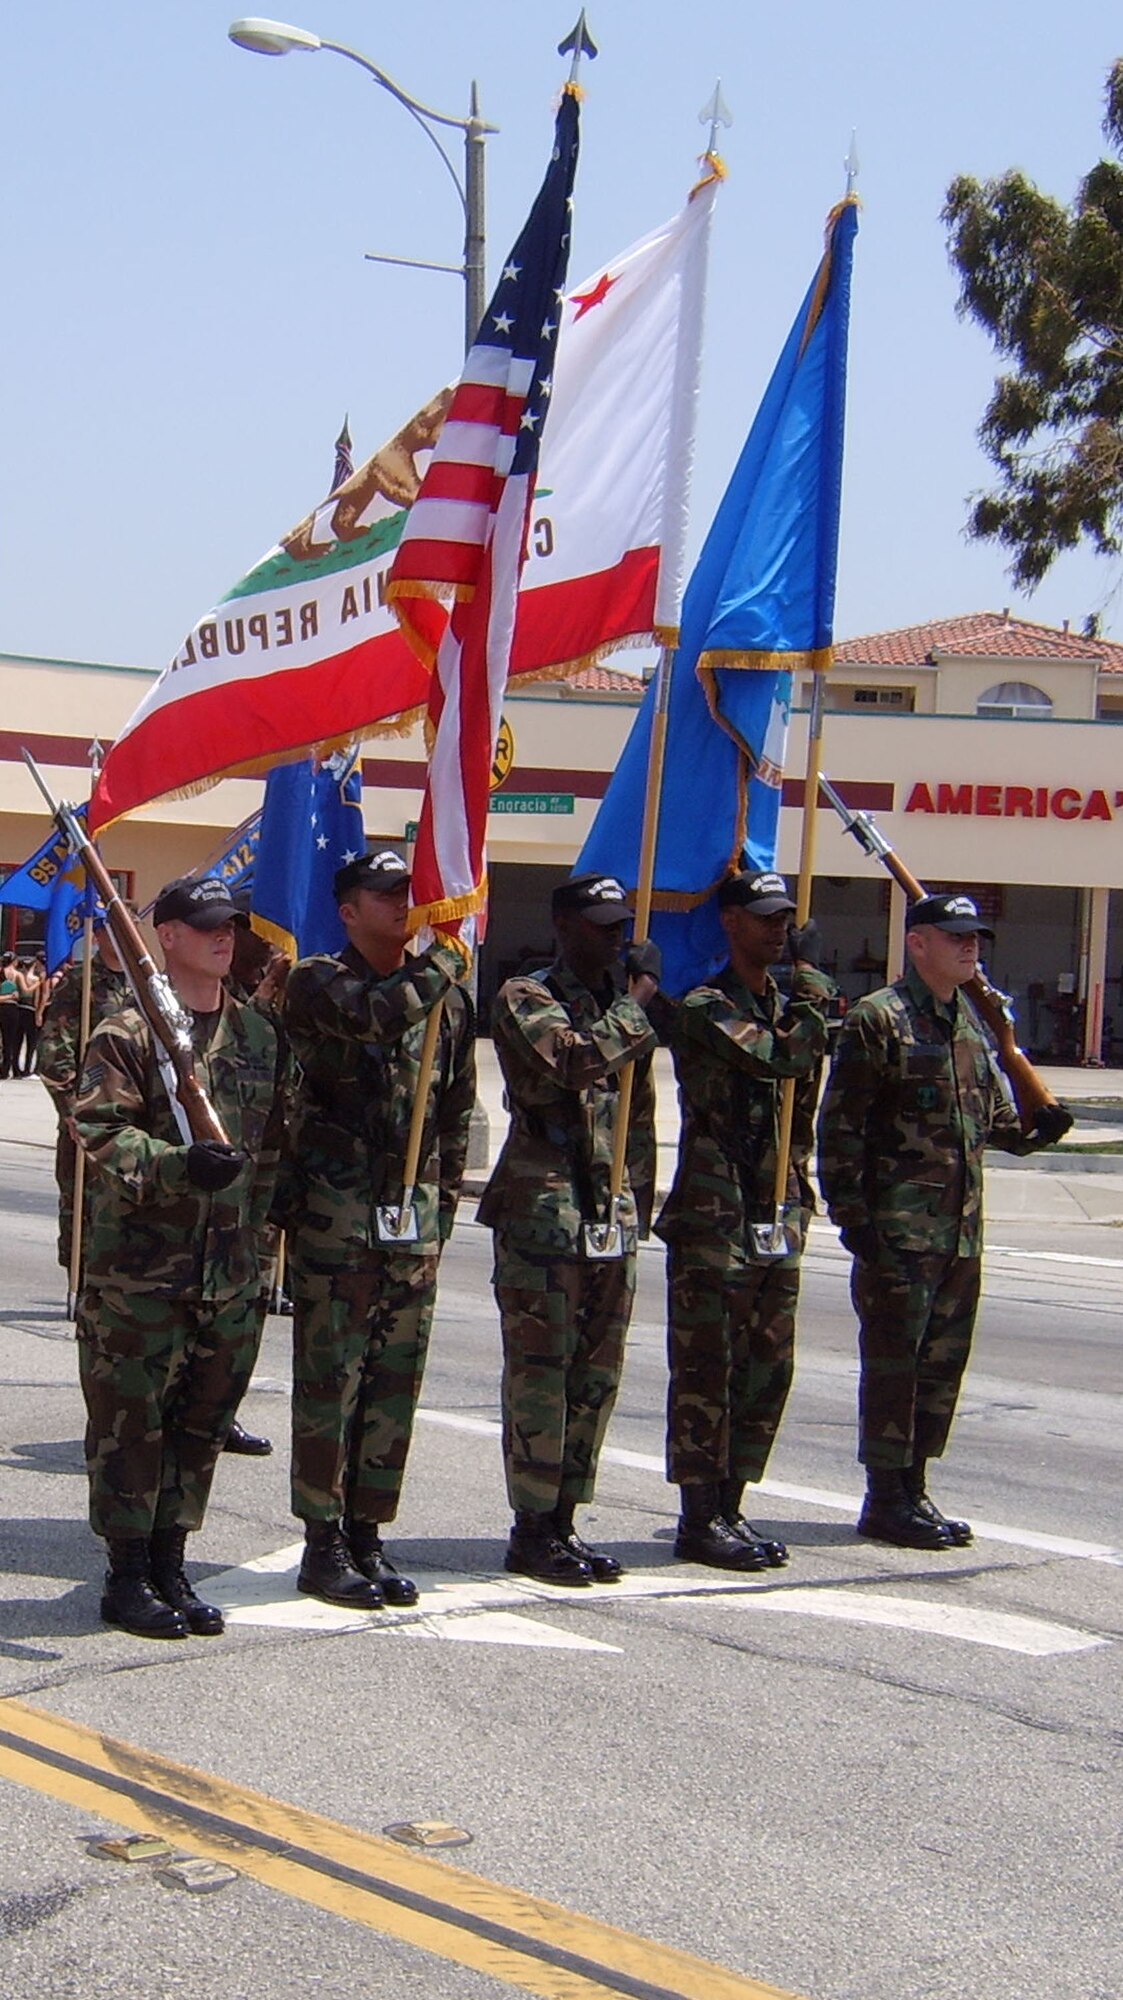 The Blue Eagles Honor Guard leads Team Edwards' contingent for the 48th Annual City of Torrance Armed Forces Day Parade and Celebration on May 19. (Photo by Senior Master Sgt. Michael Fowler)